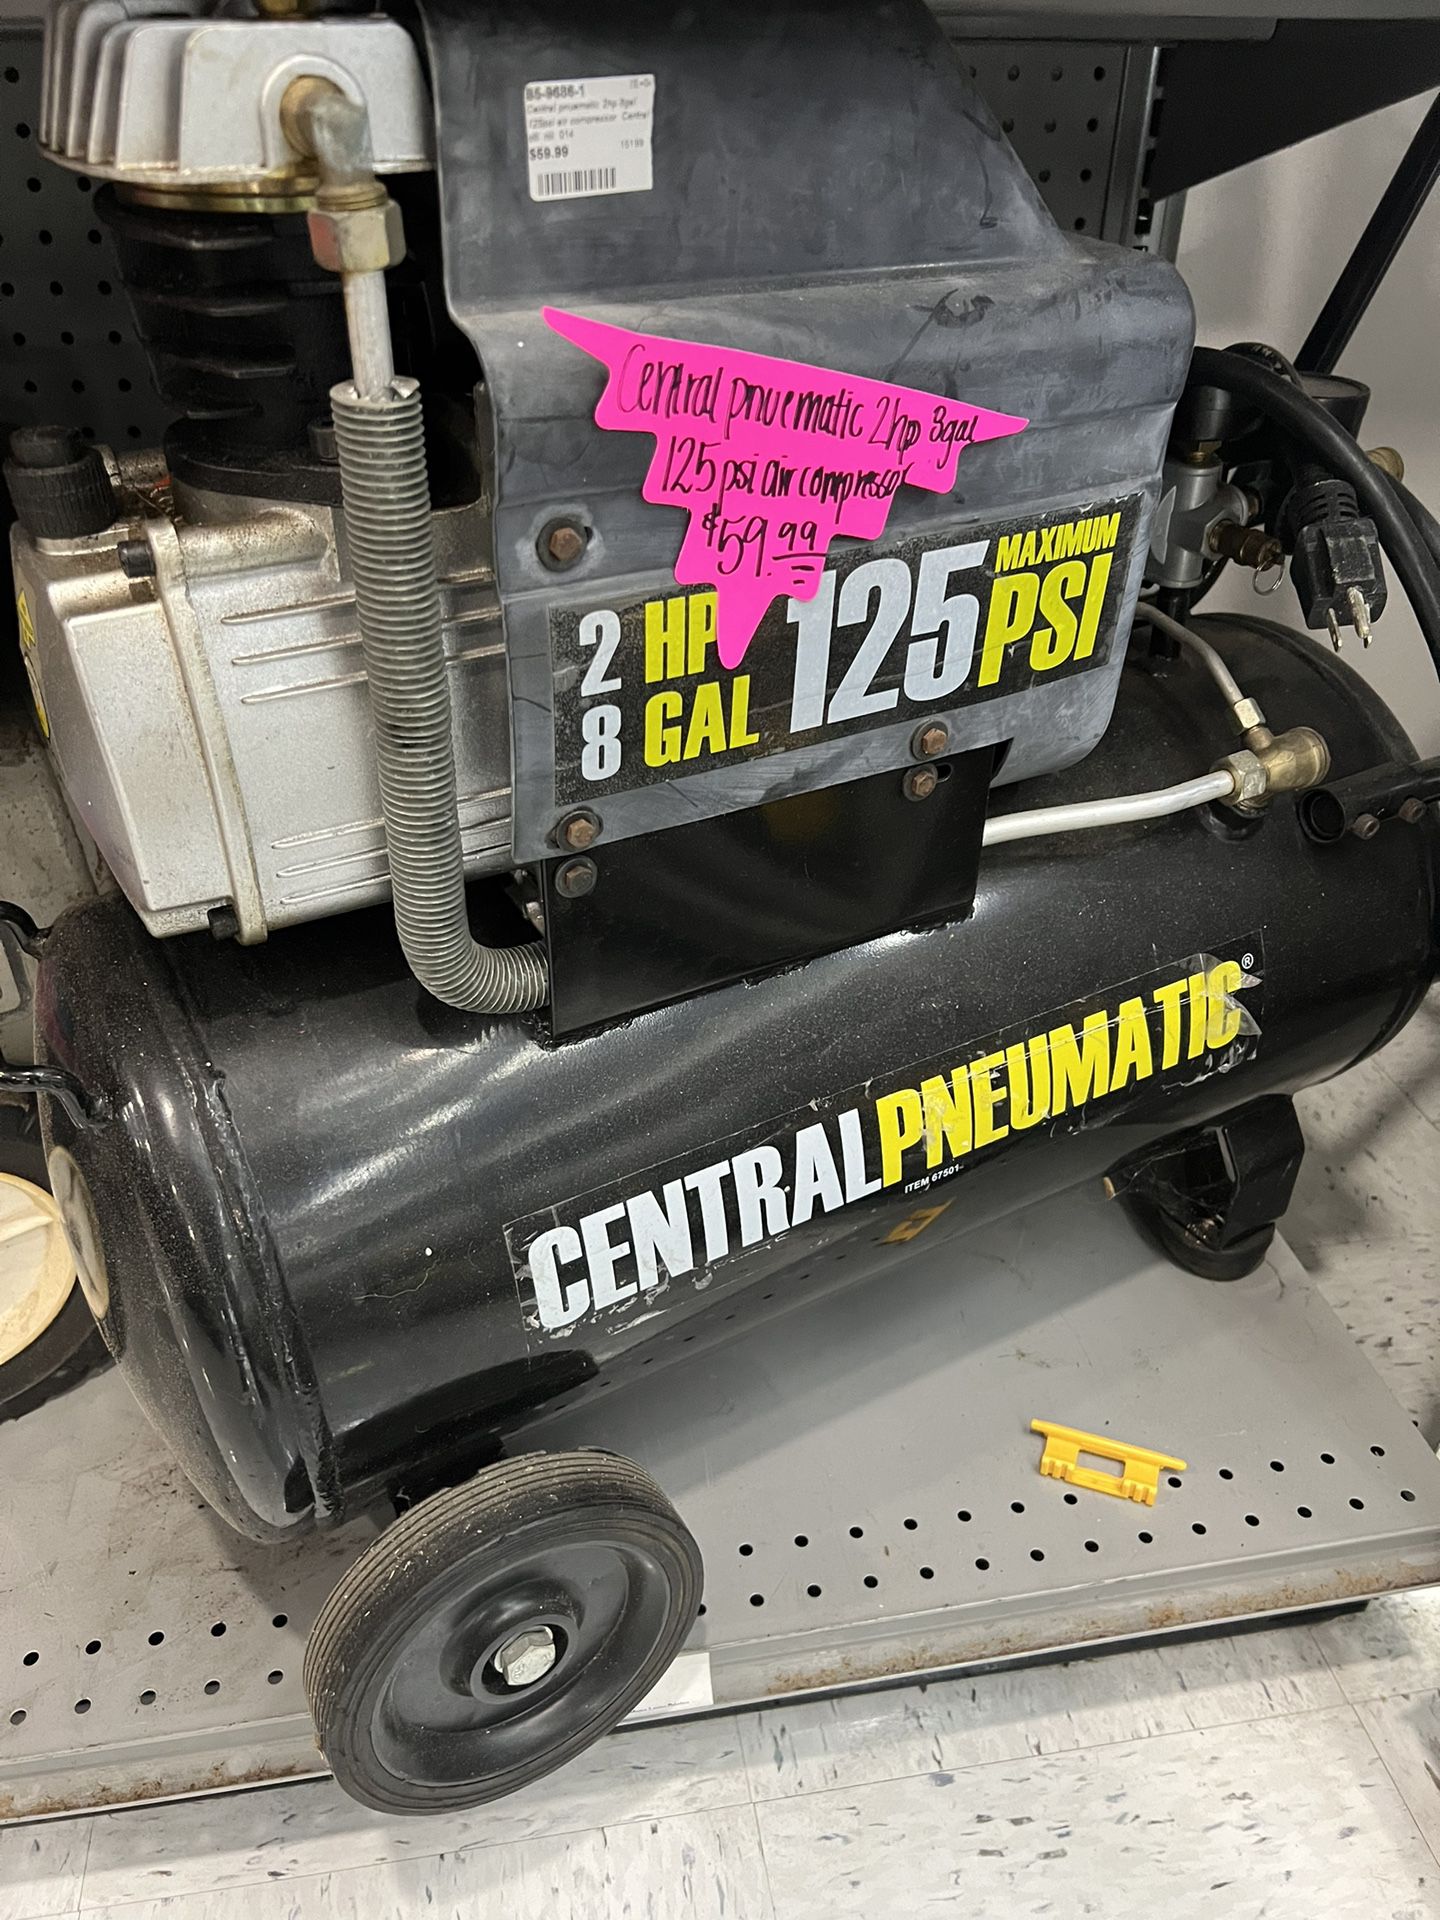 CENTRAL PNEUMATIC 2 HP 8 GAL 125 PSI